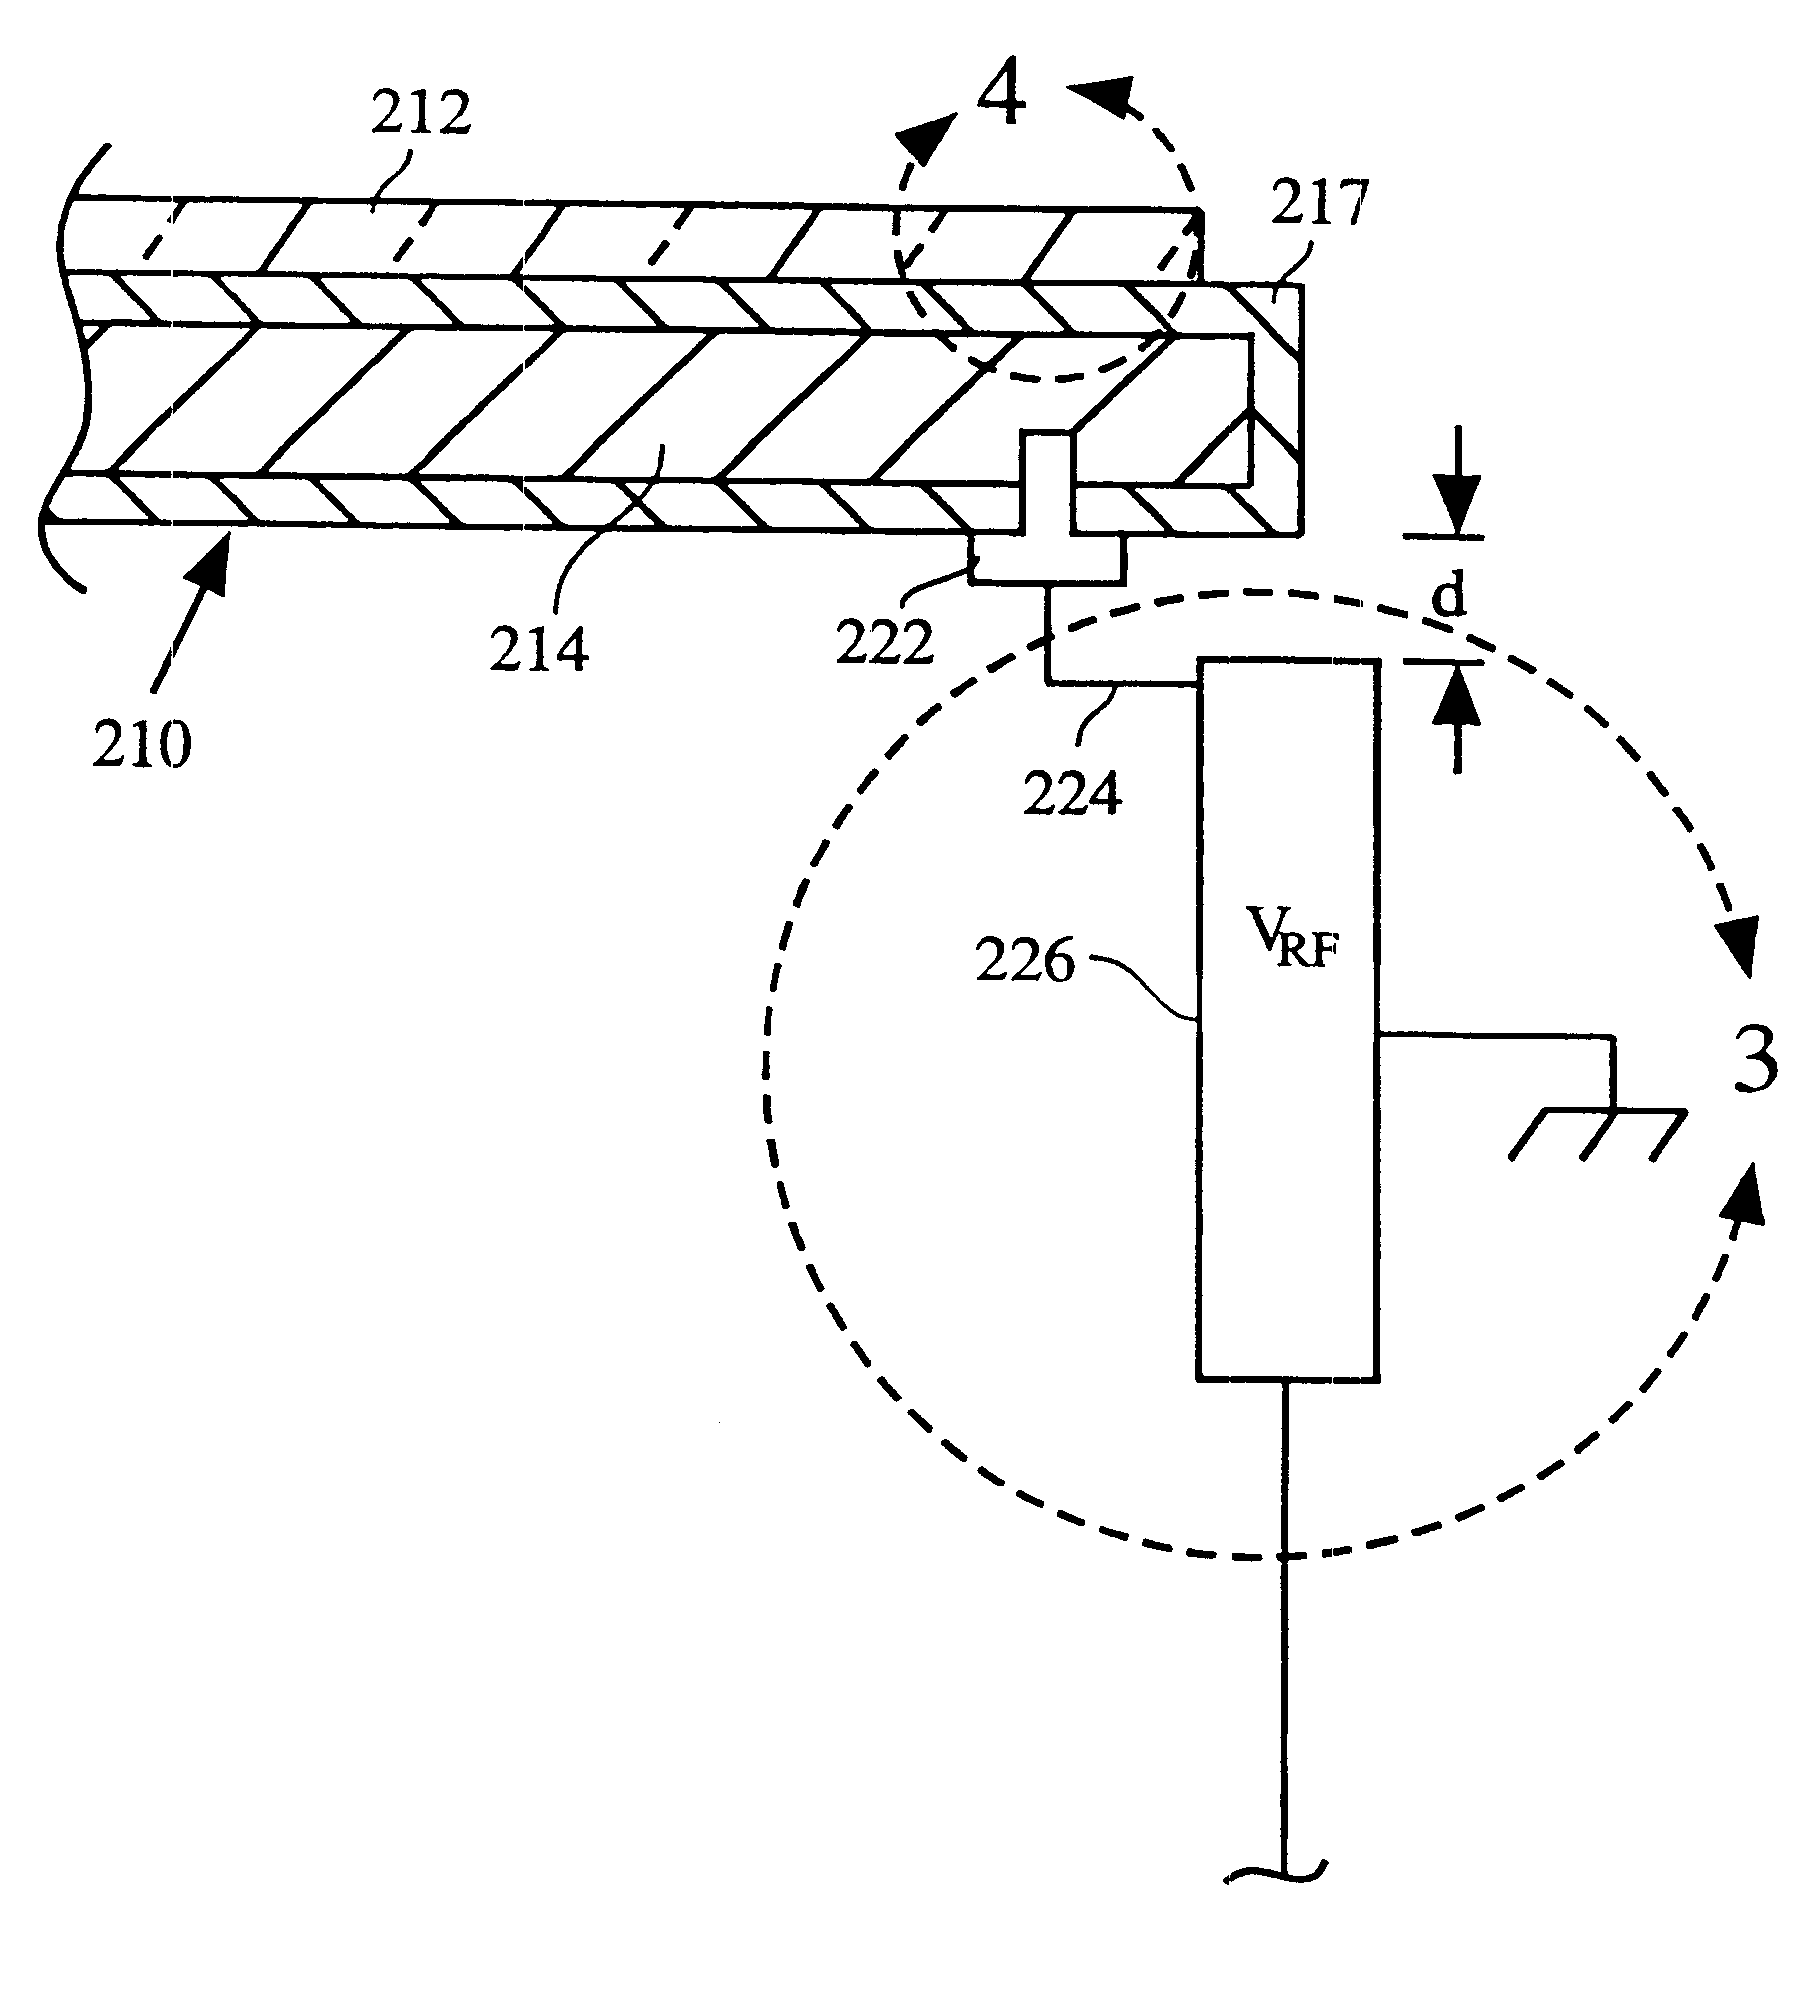 Voltage control sensor and control interface for radio frequency power regulation in a plasma reactor